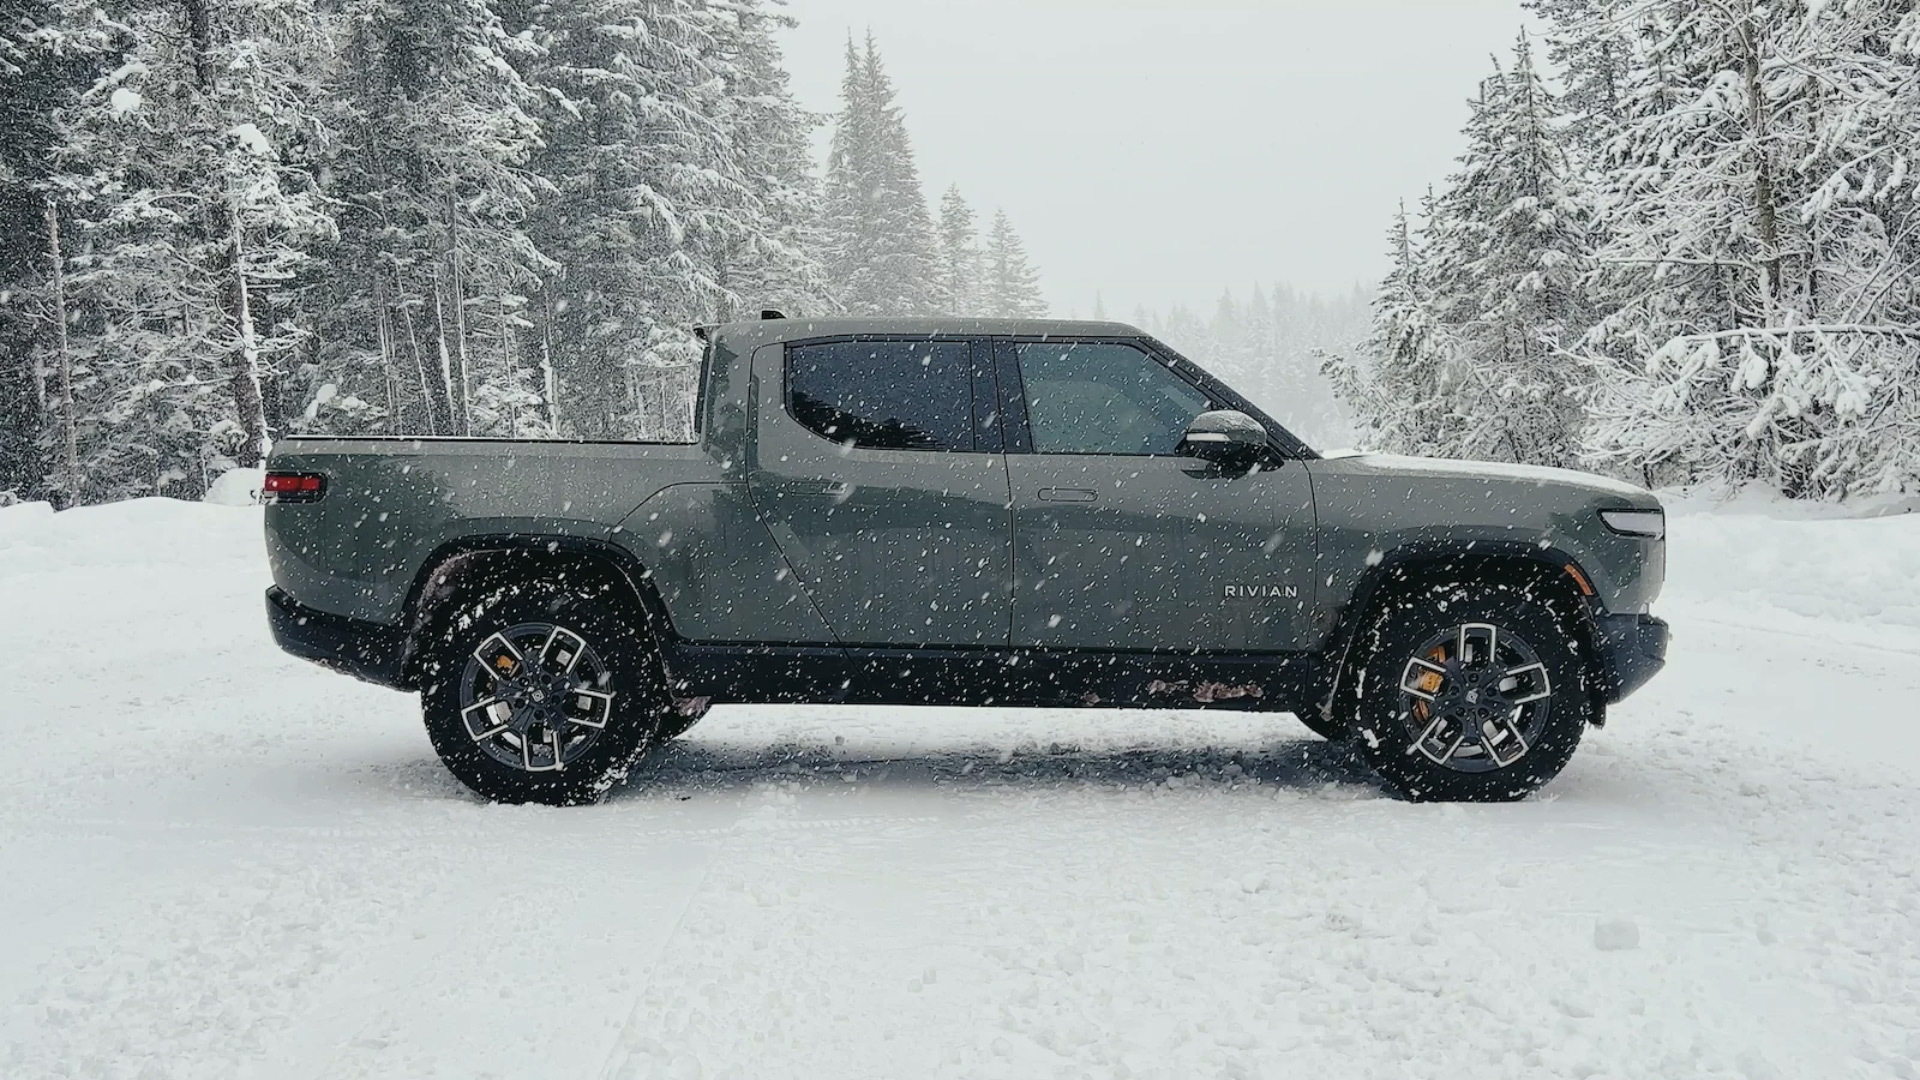 Rivian introduces Snow mode on R1T and R1S